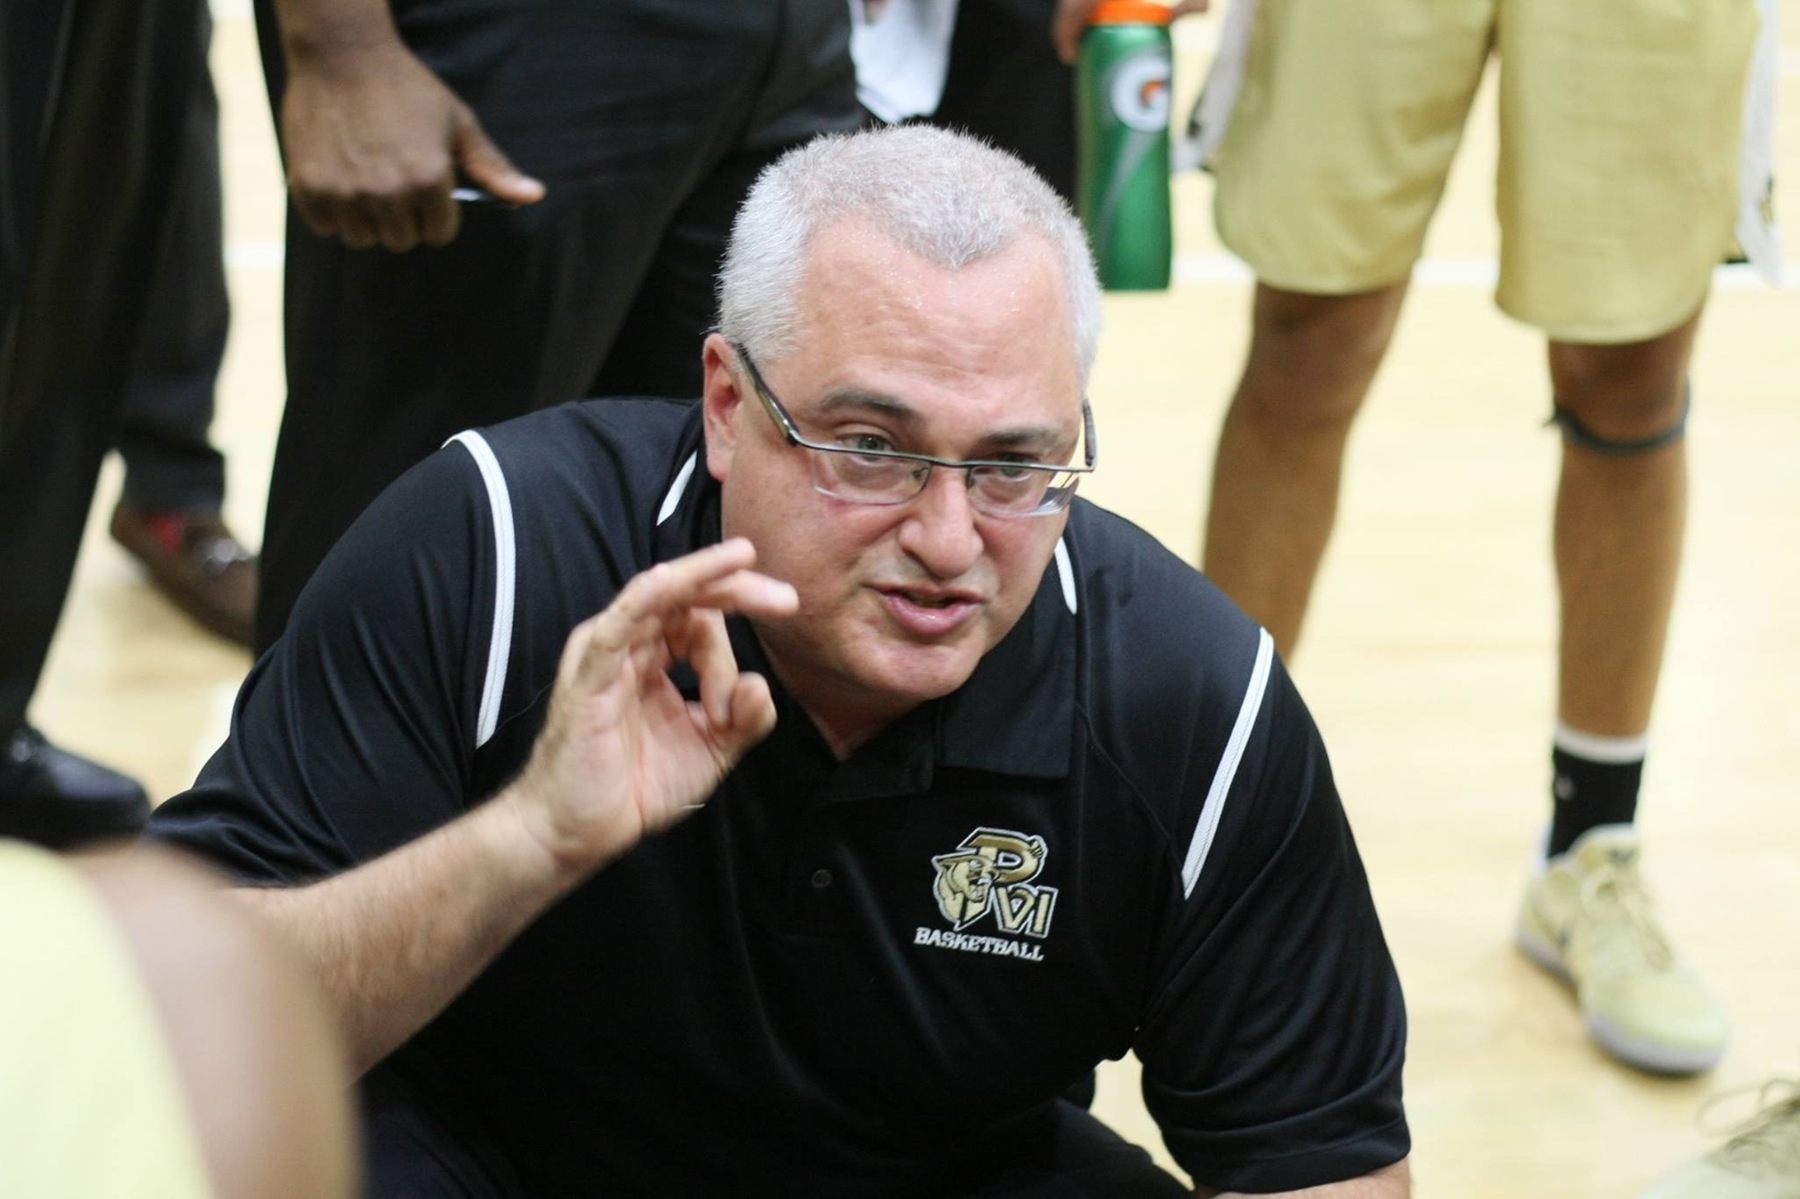 Coach Farello happy to get revenge from last year's WCAC Championship loss.